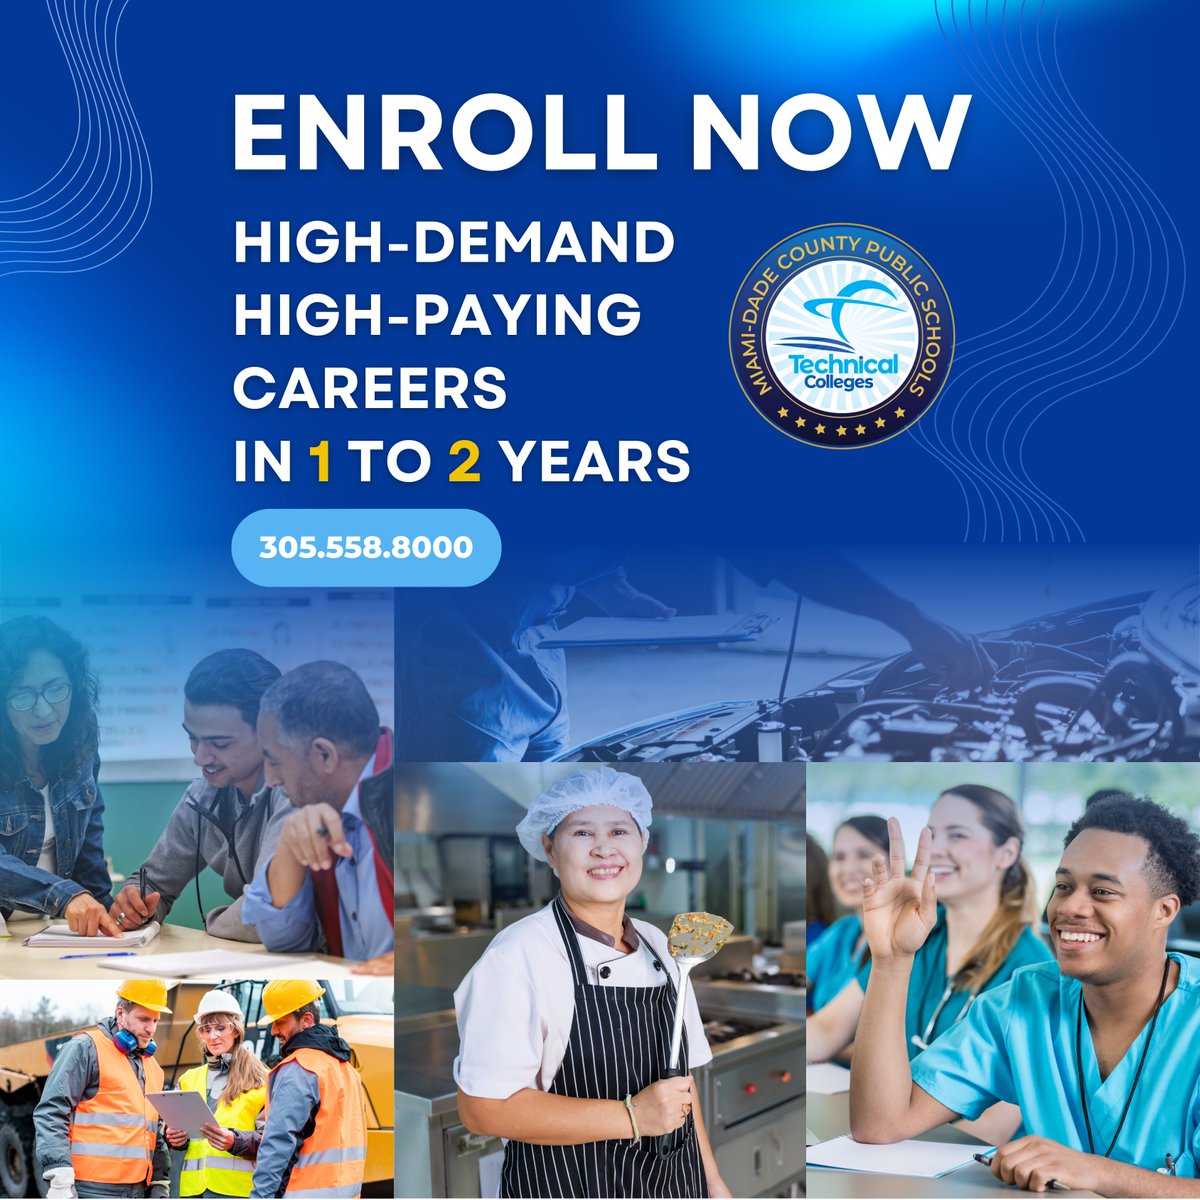 At MDCPS Technical Colleges, we're dedicated to affordable, accessible education. Our hands-on programs ensure students are equipped to succeed in today's competitive world. #YourBestChoiceMDCPS 💻 careerinayear.com